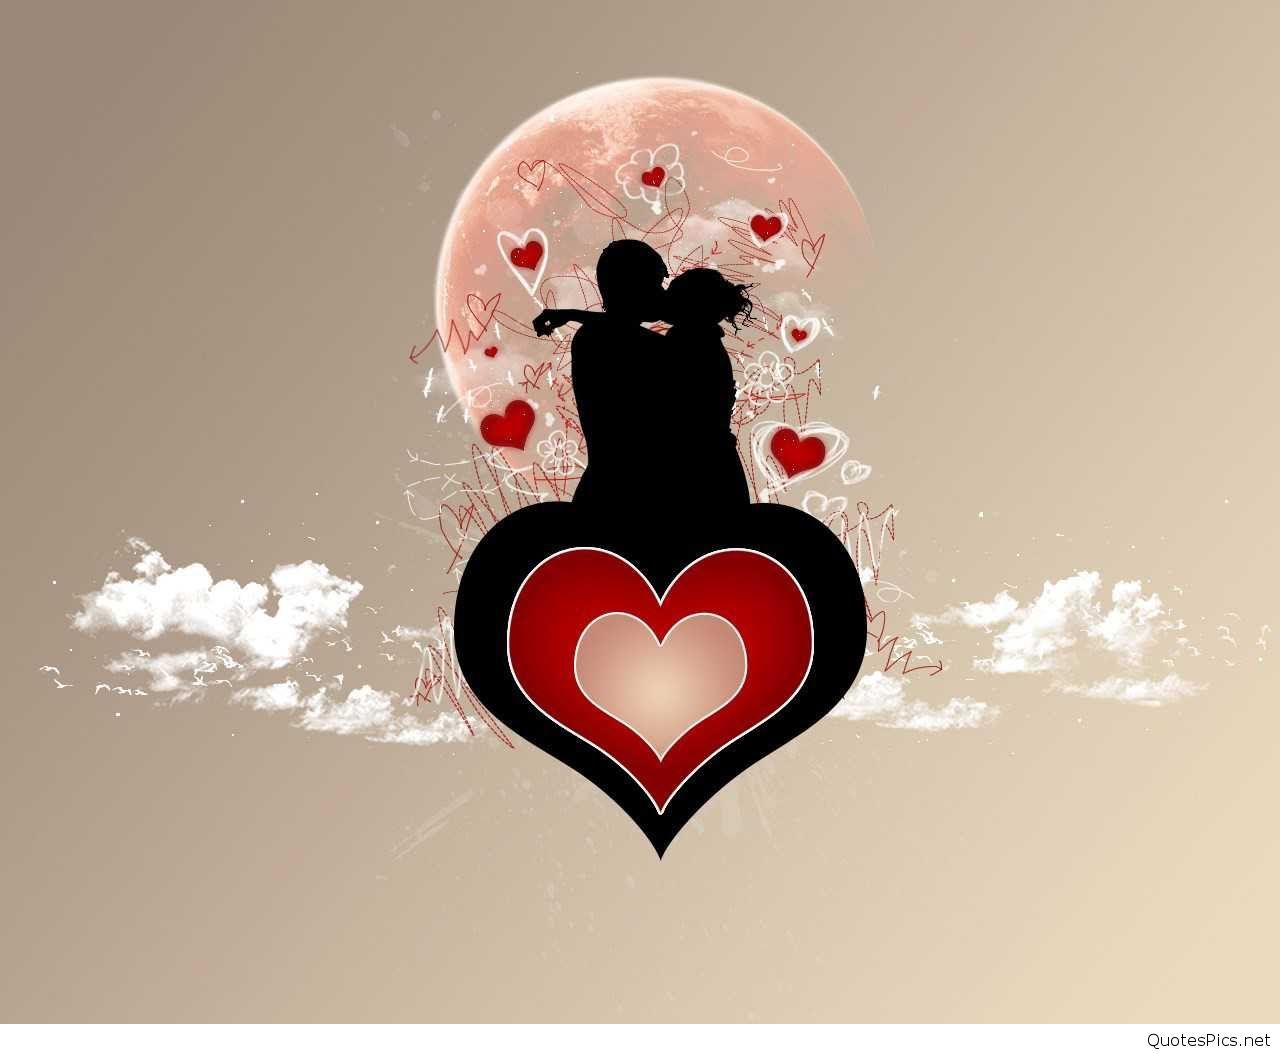 love wallpapers for android,heart,love,illustration,heart,valentine's day